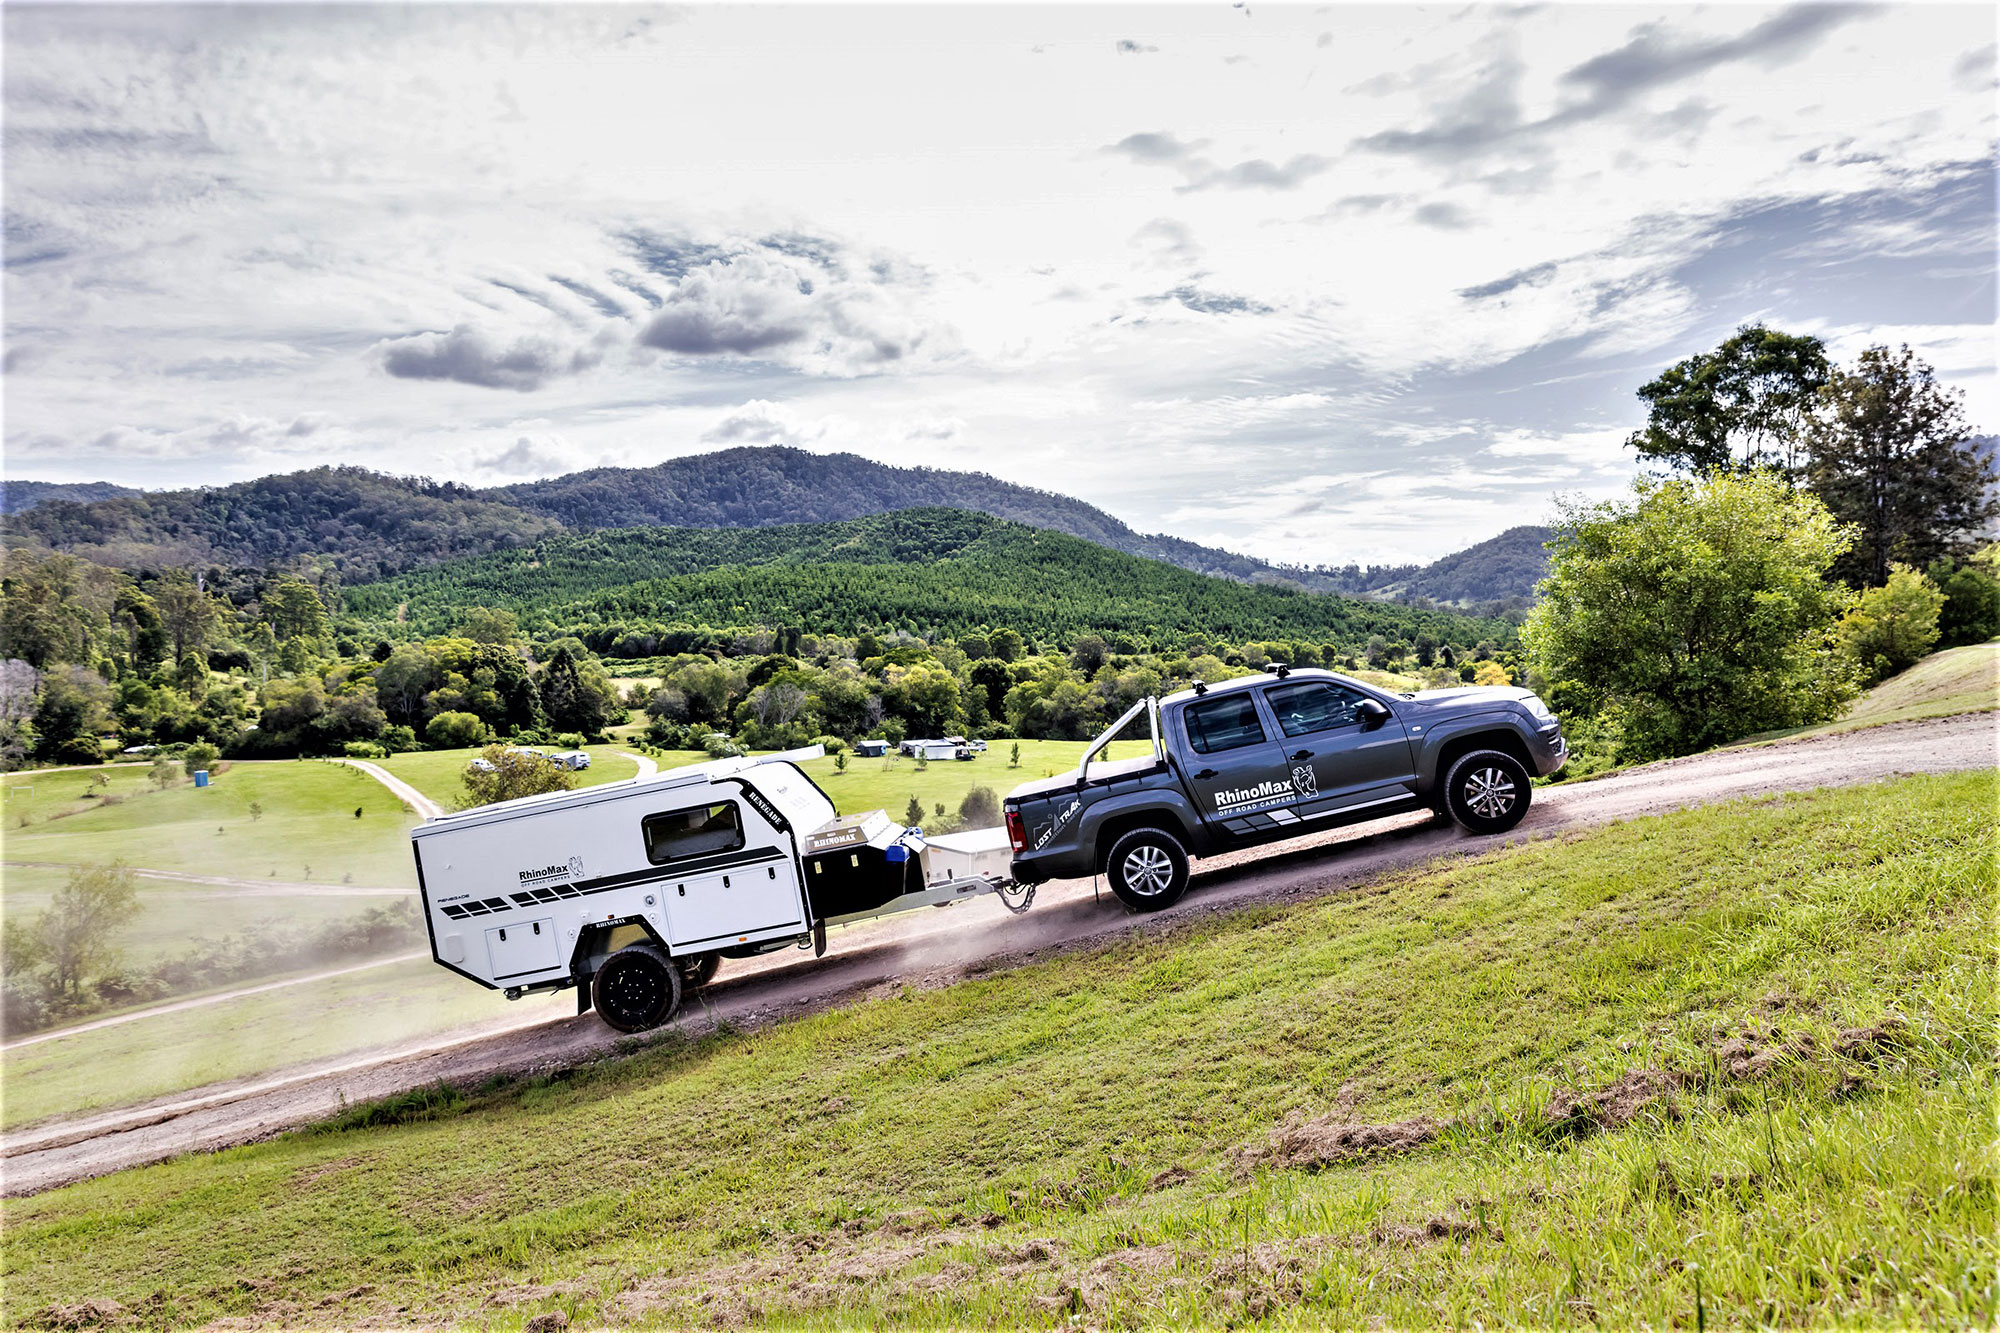 Rhinomax off-road campers tradervs